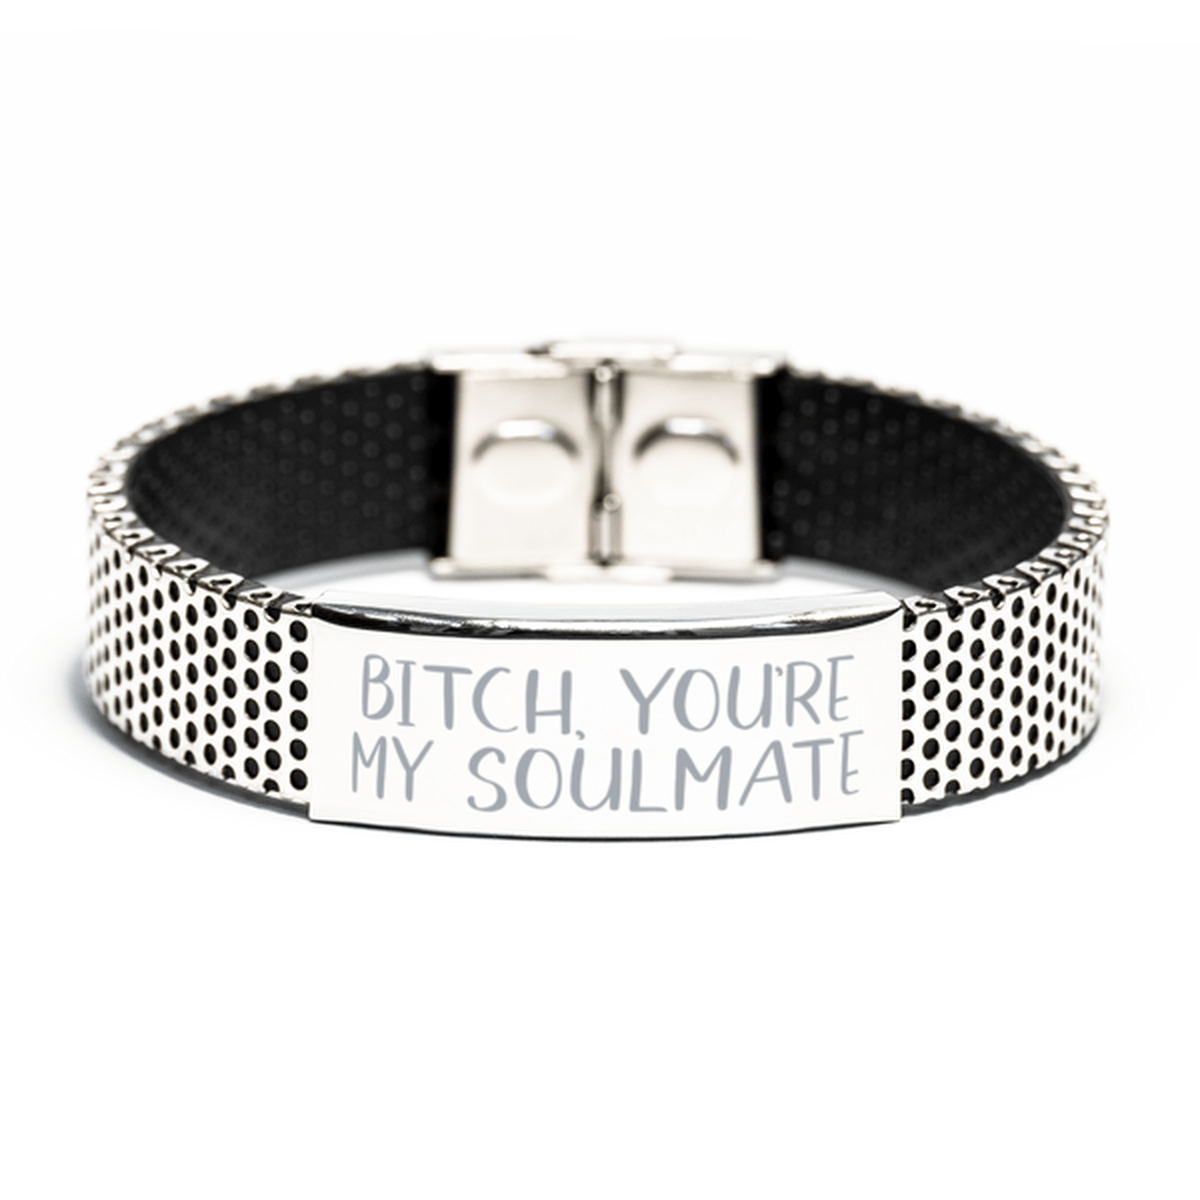 Bitch You're My Soulmate - Unbiological Sister Gift - Stainless Steel Bracelet for Birthday or Christmas - Jewelry Gift for Best Friend, Bestie, BFF